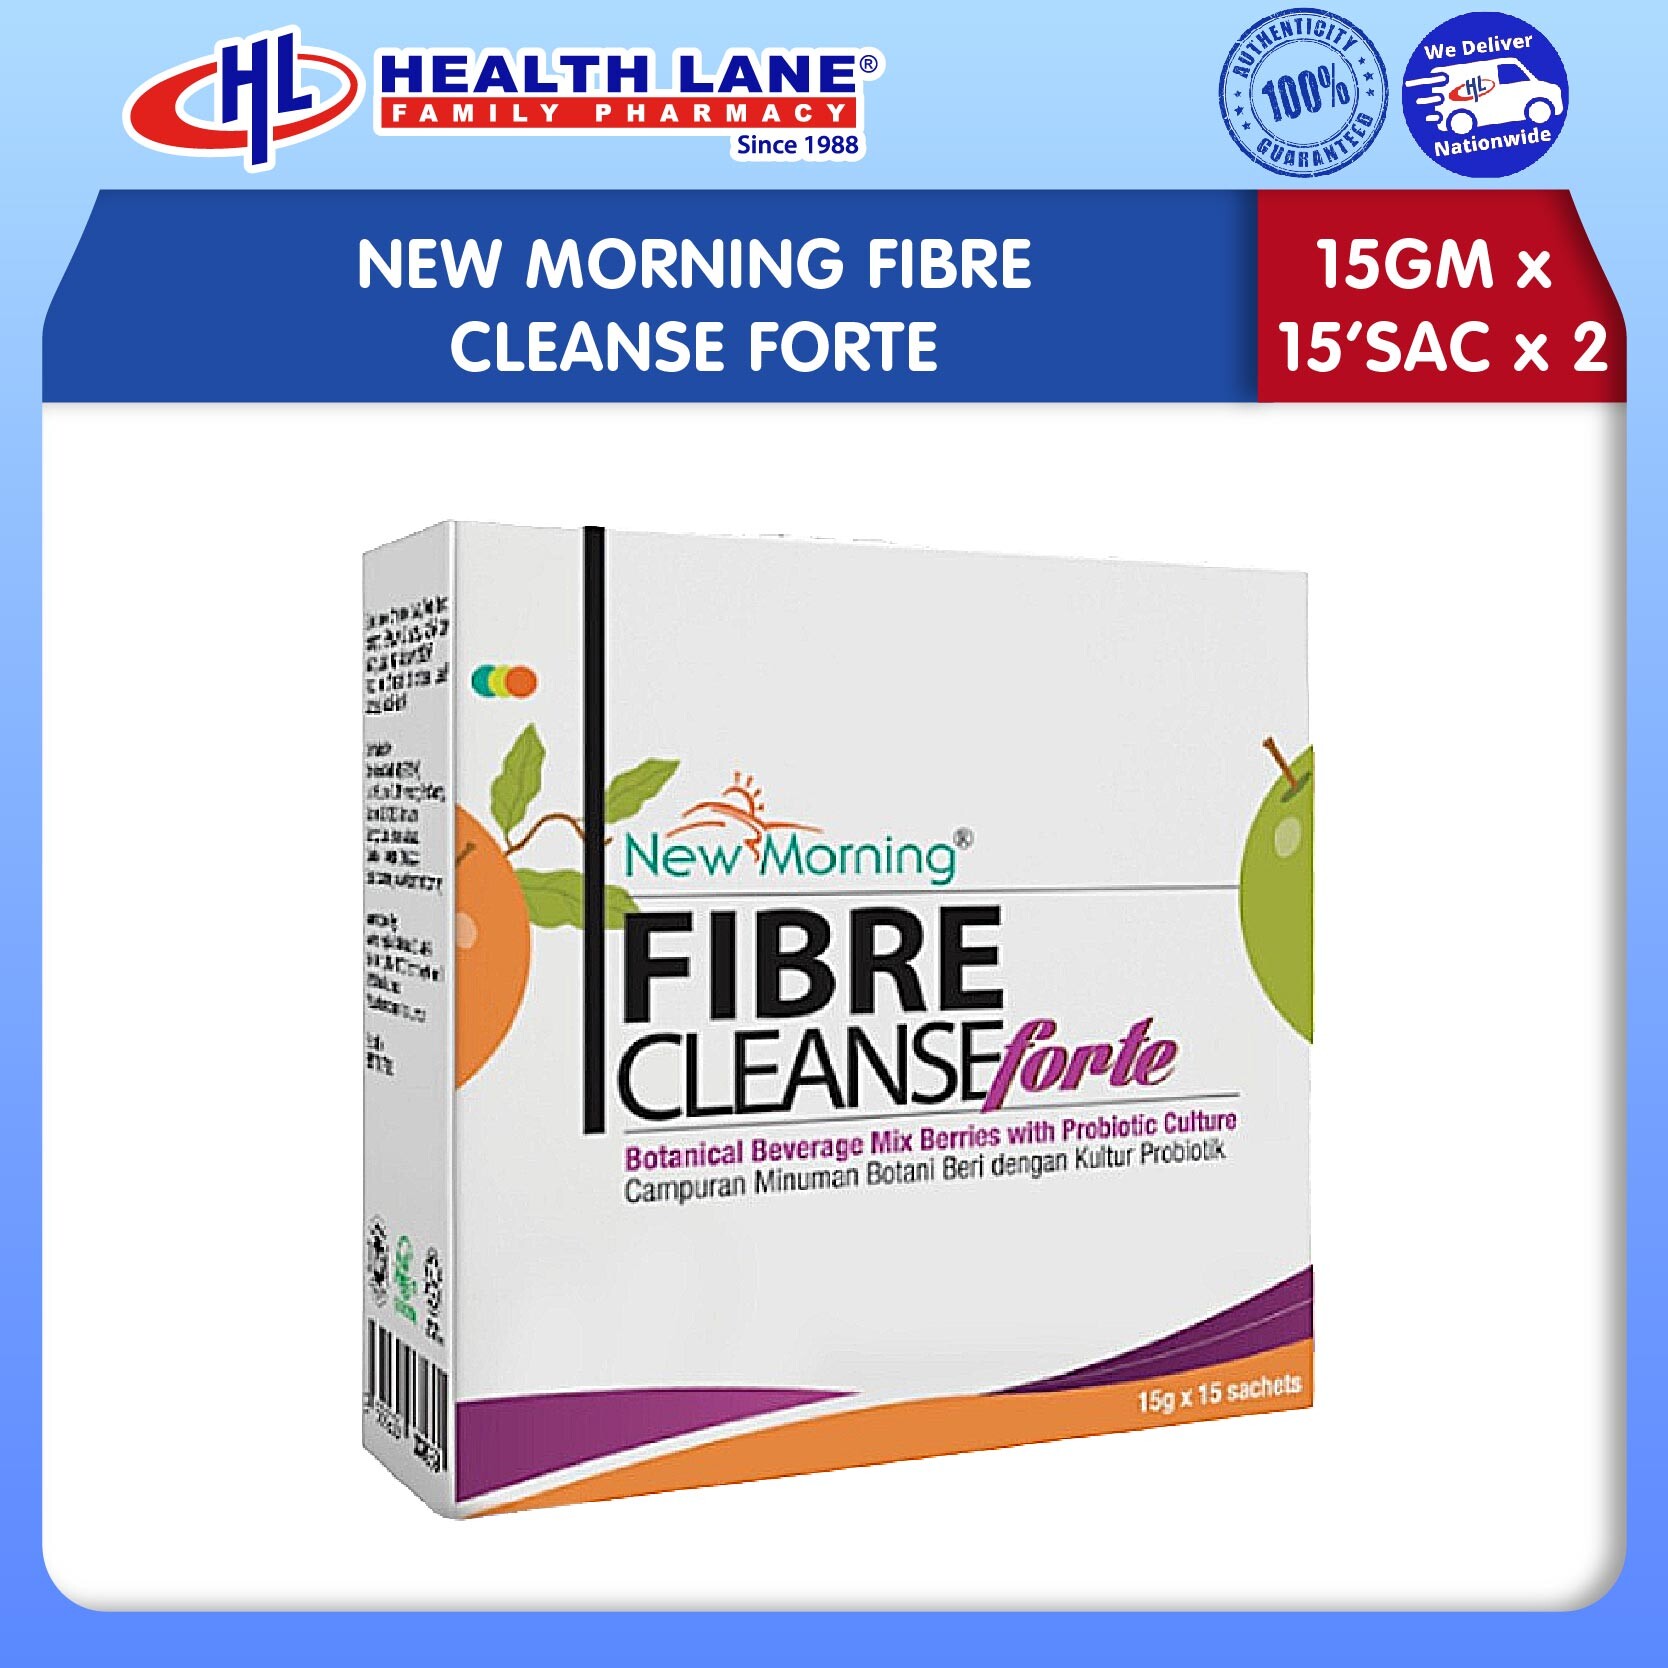 NEW MORNING FIBRE CLEANSE FORTE (15GMx15'SAC)x2